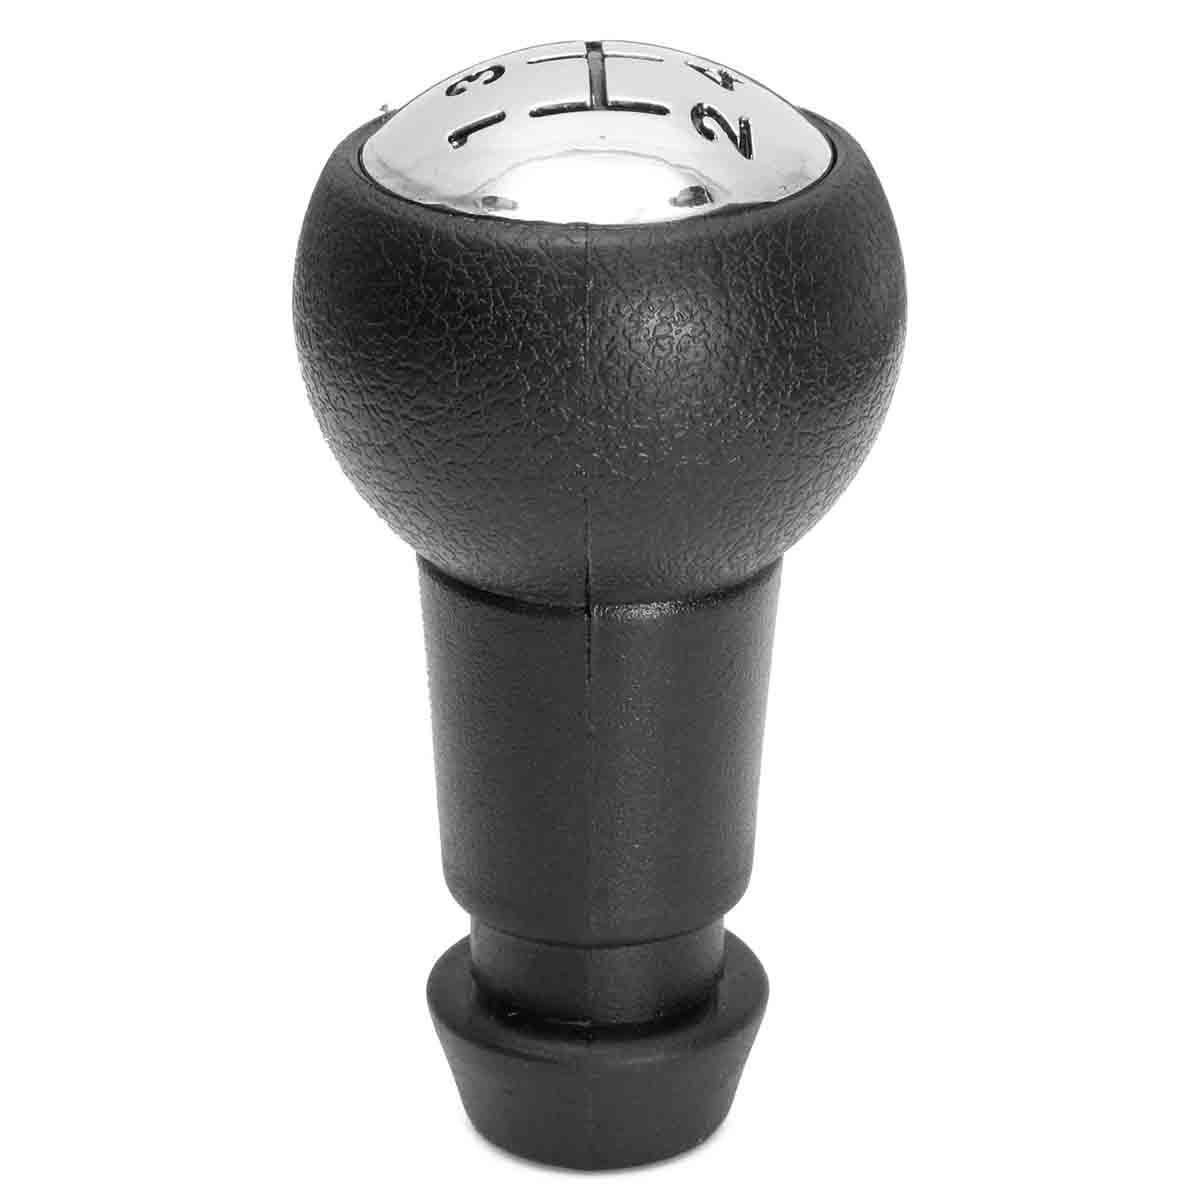 Car Gear Shift Knob And Lever Adapter For Peugeot